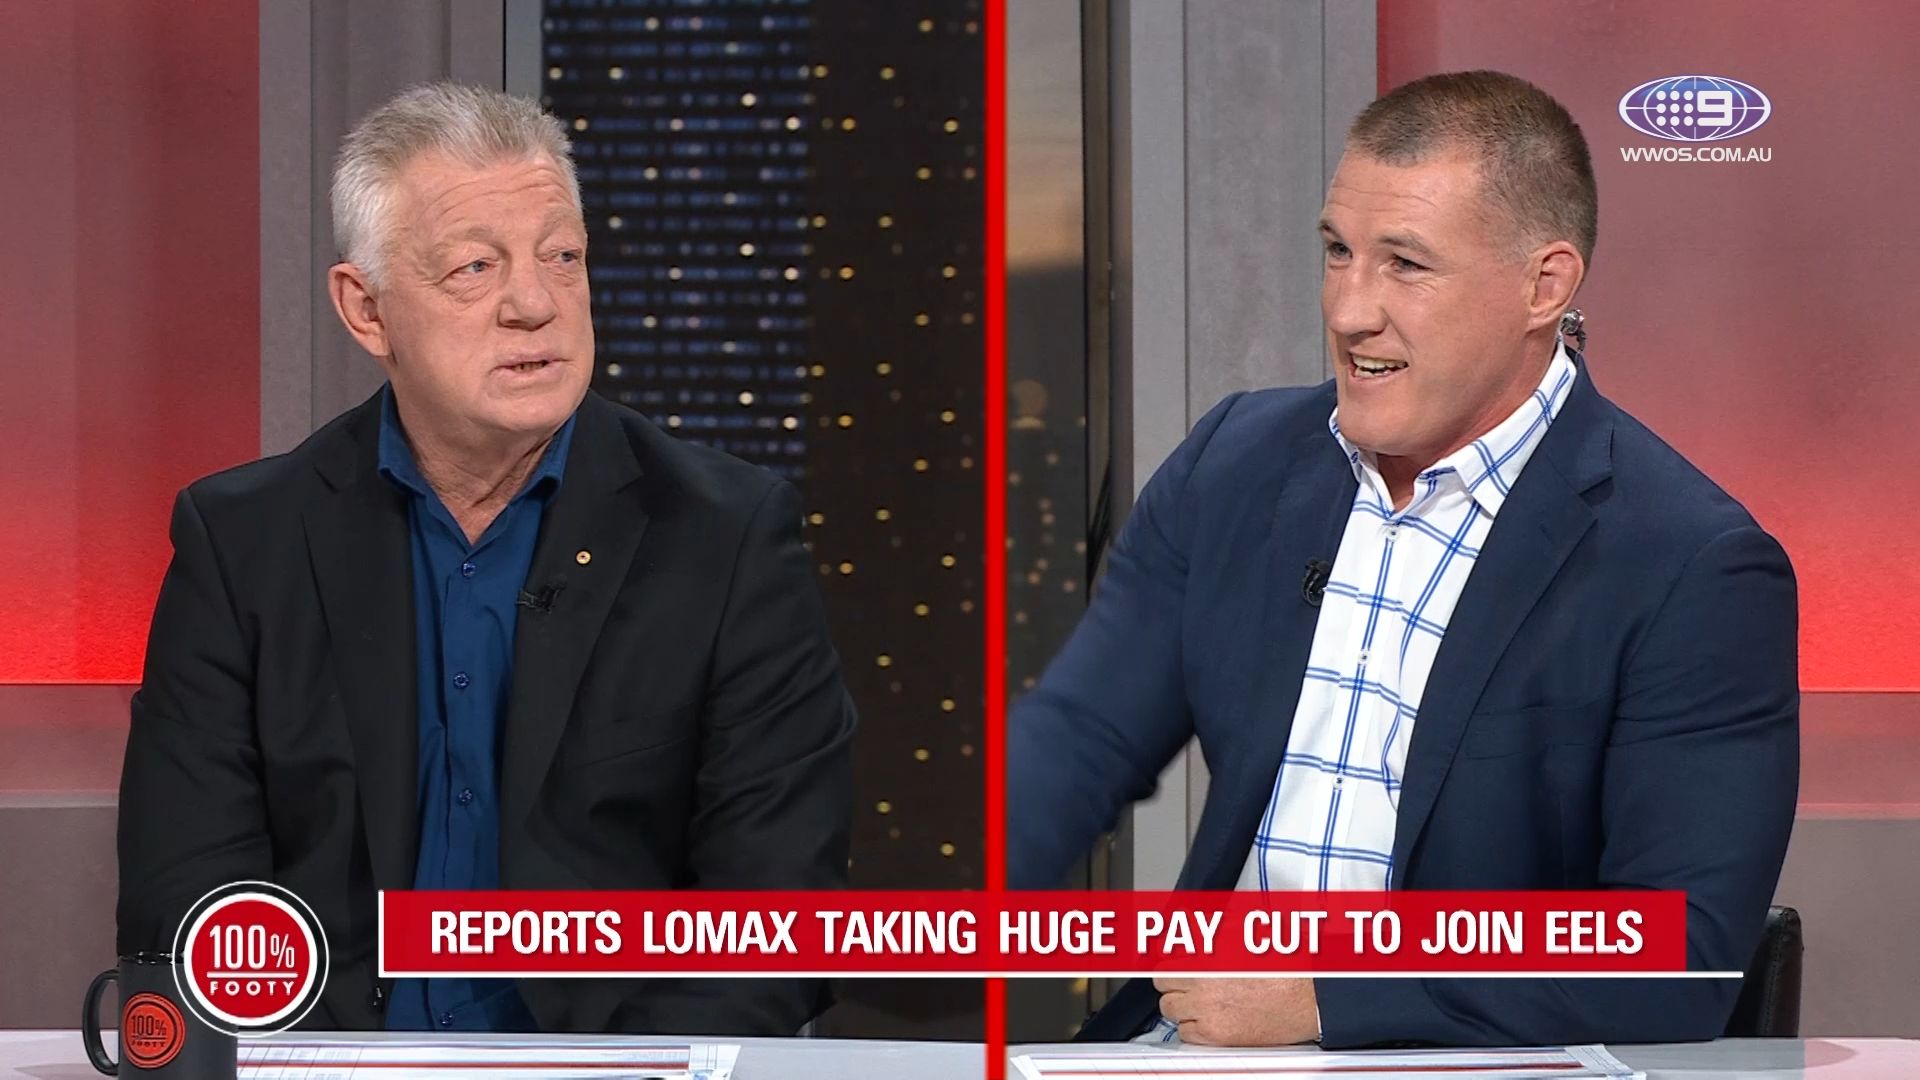 'Might be getting paid somewhere else': Lomax Parra pay cut opens up 'Pandora's Box', says Phil Gould